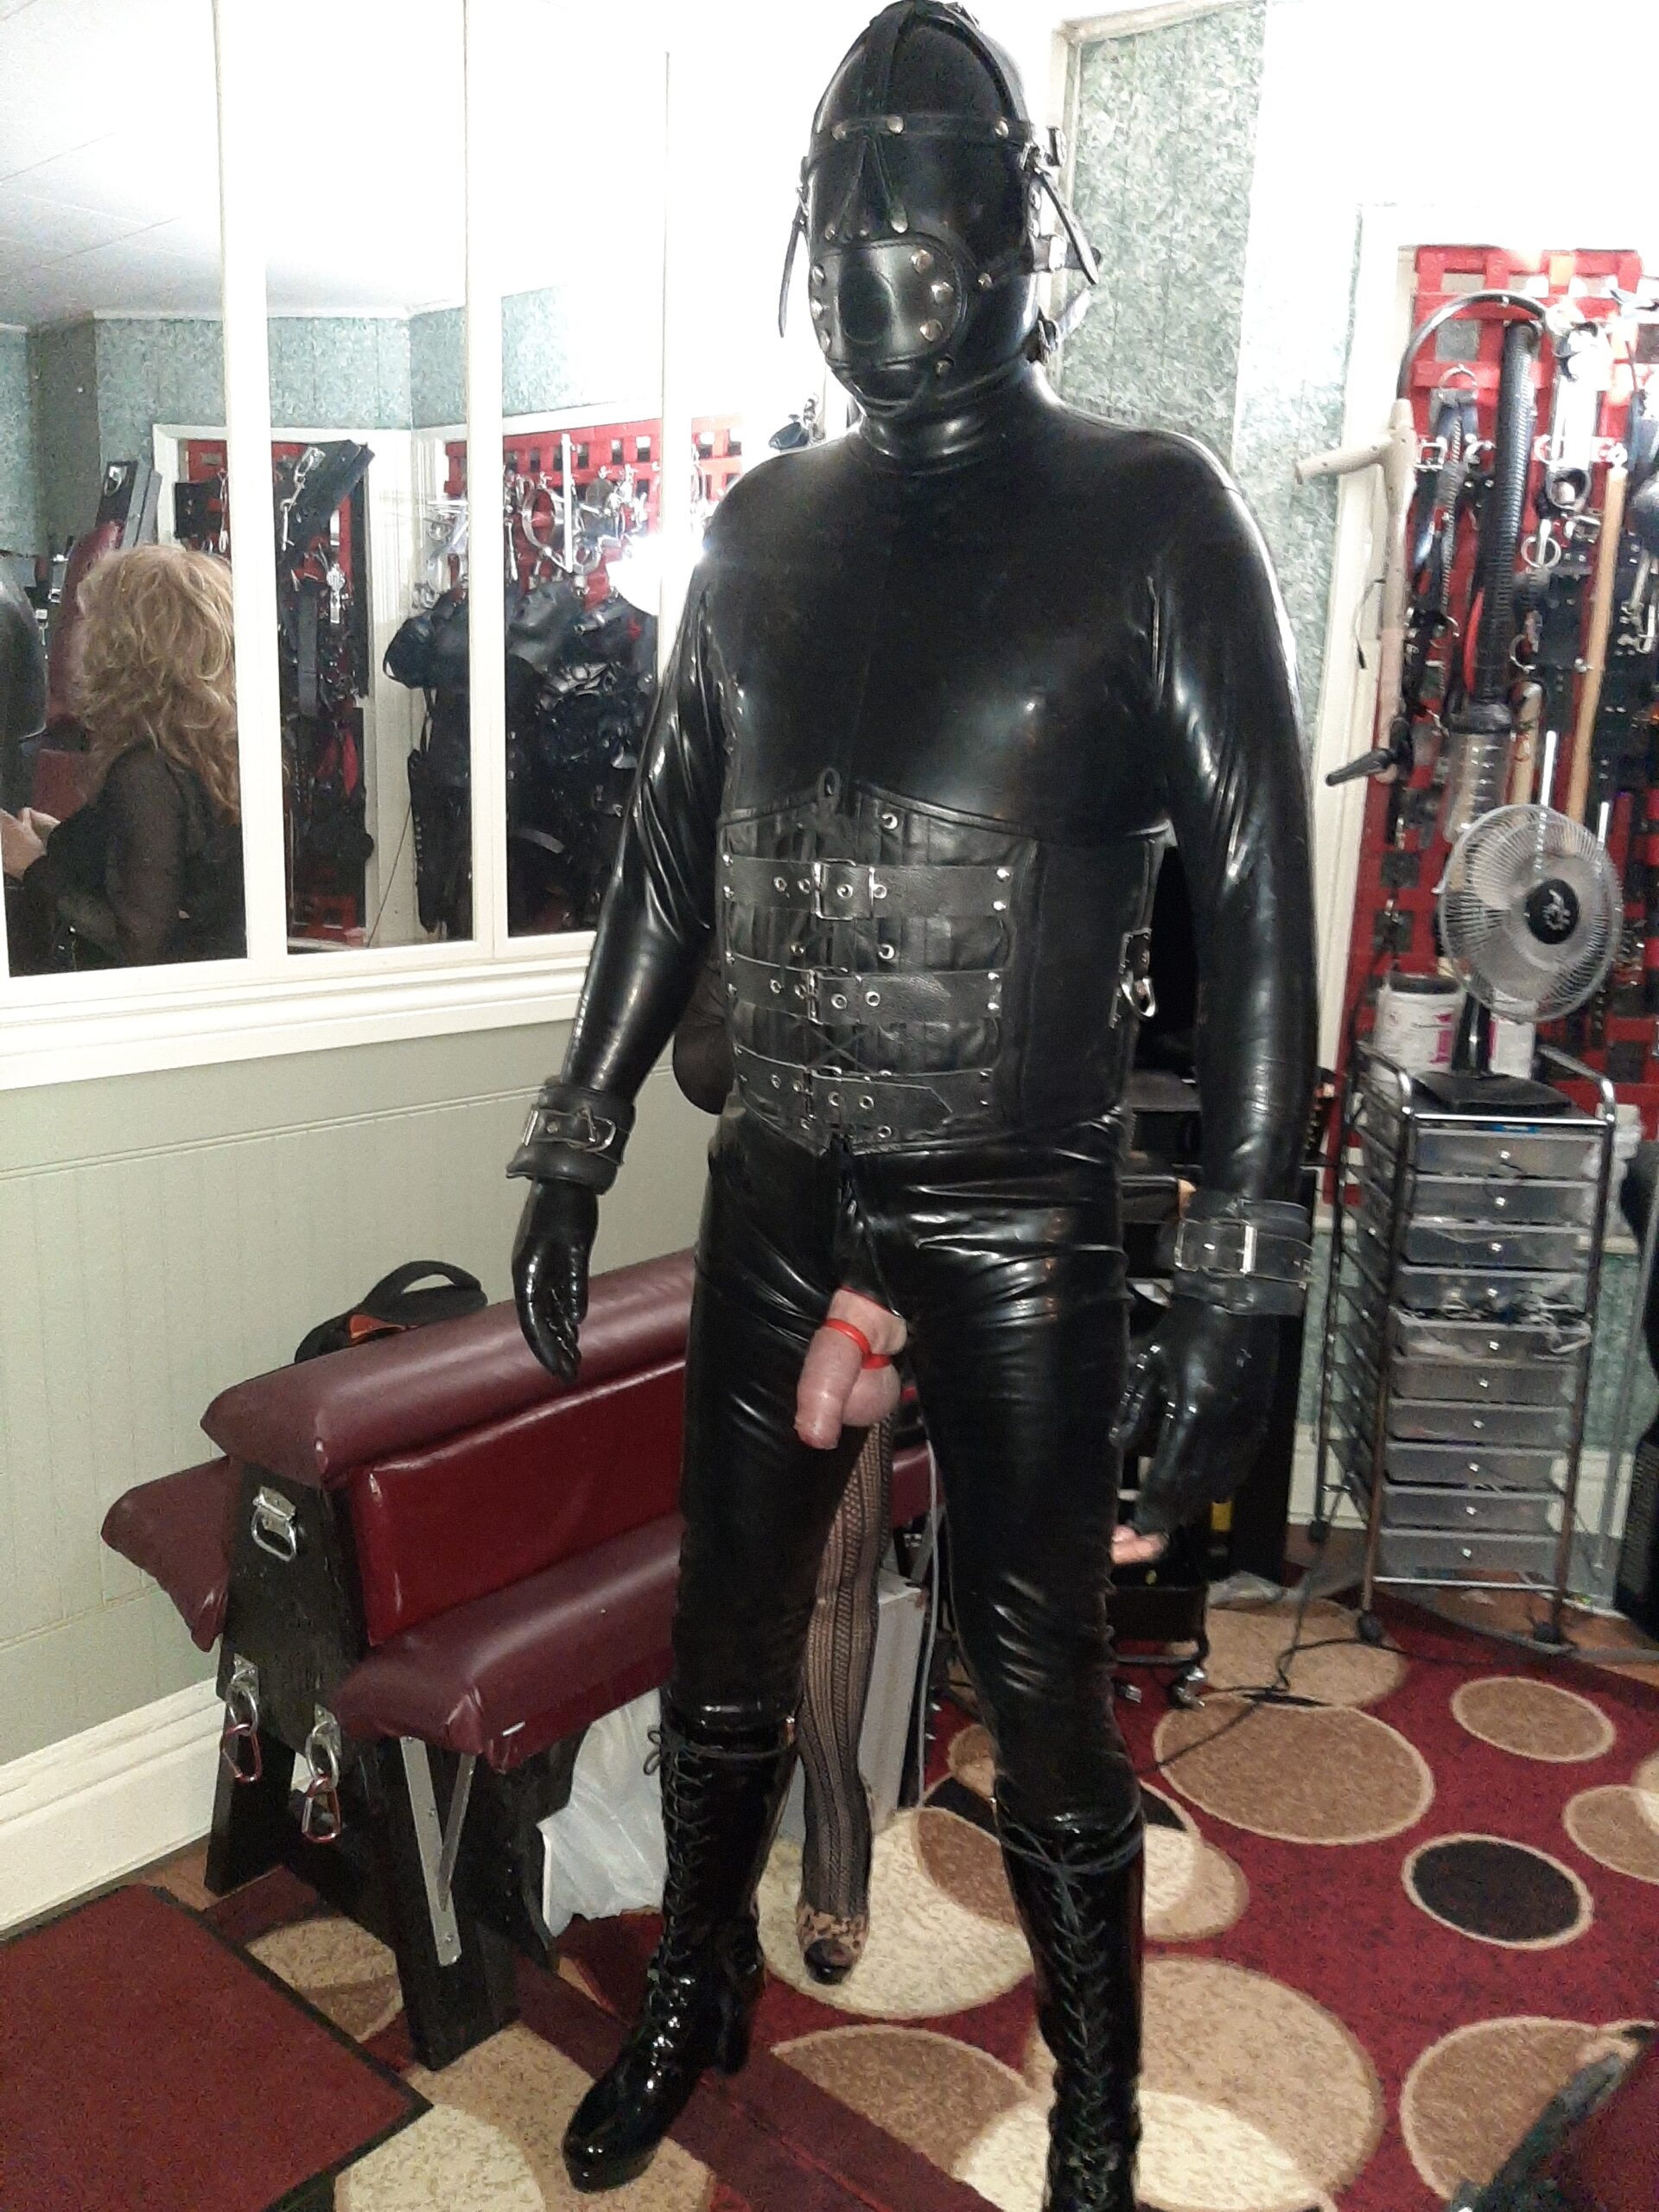 Lady M Pegging The Rubber Gimp